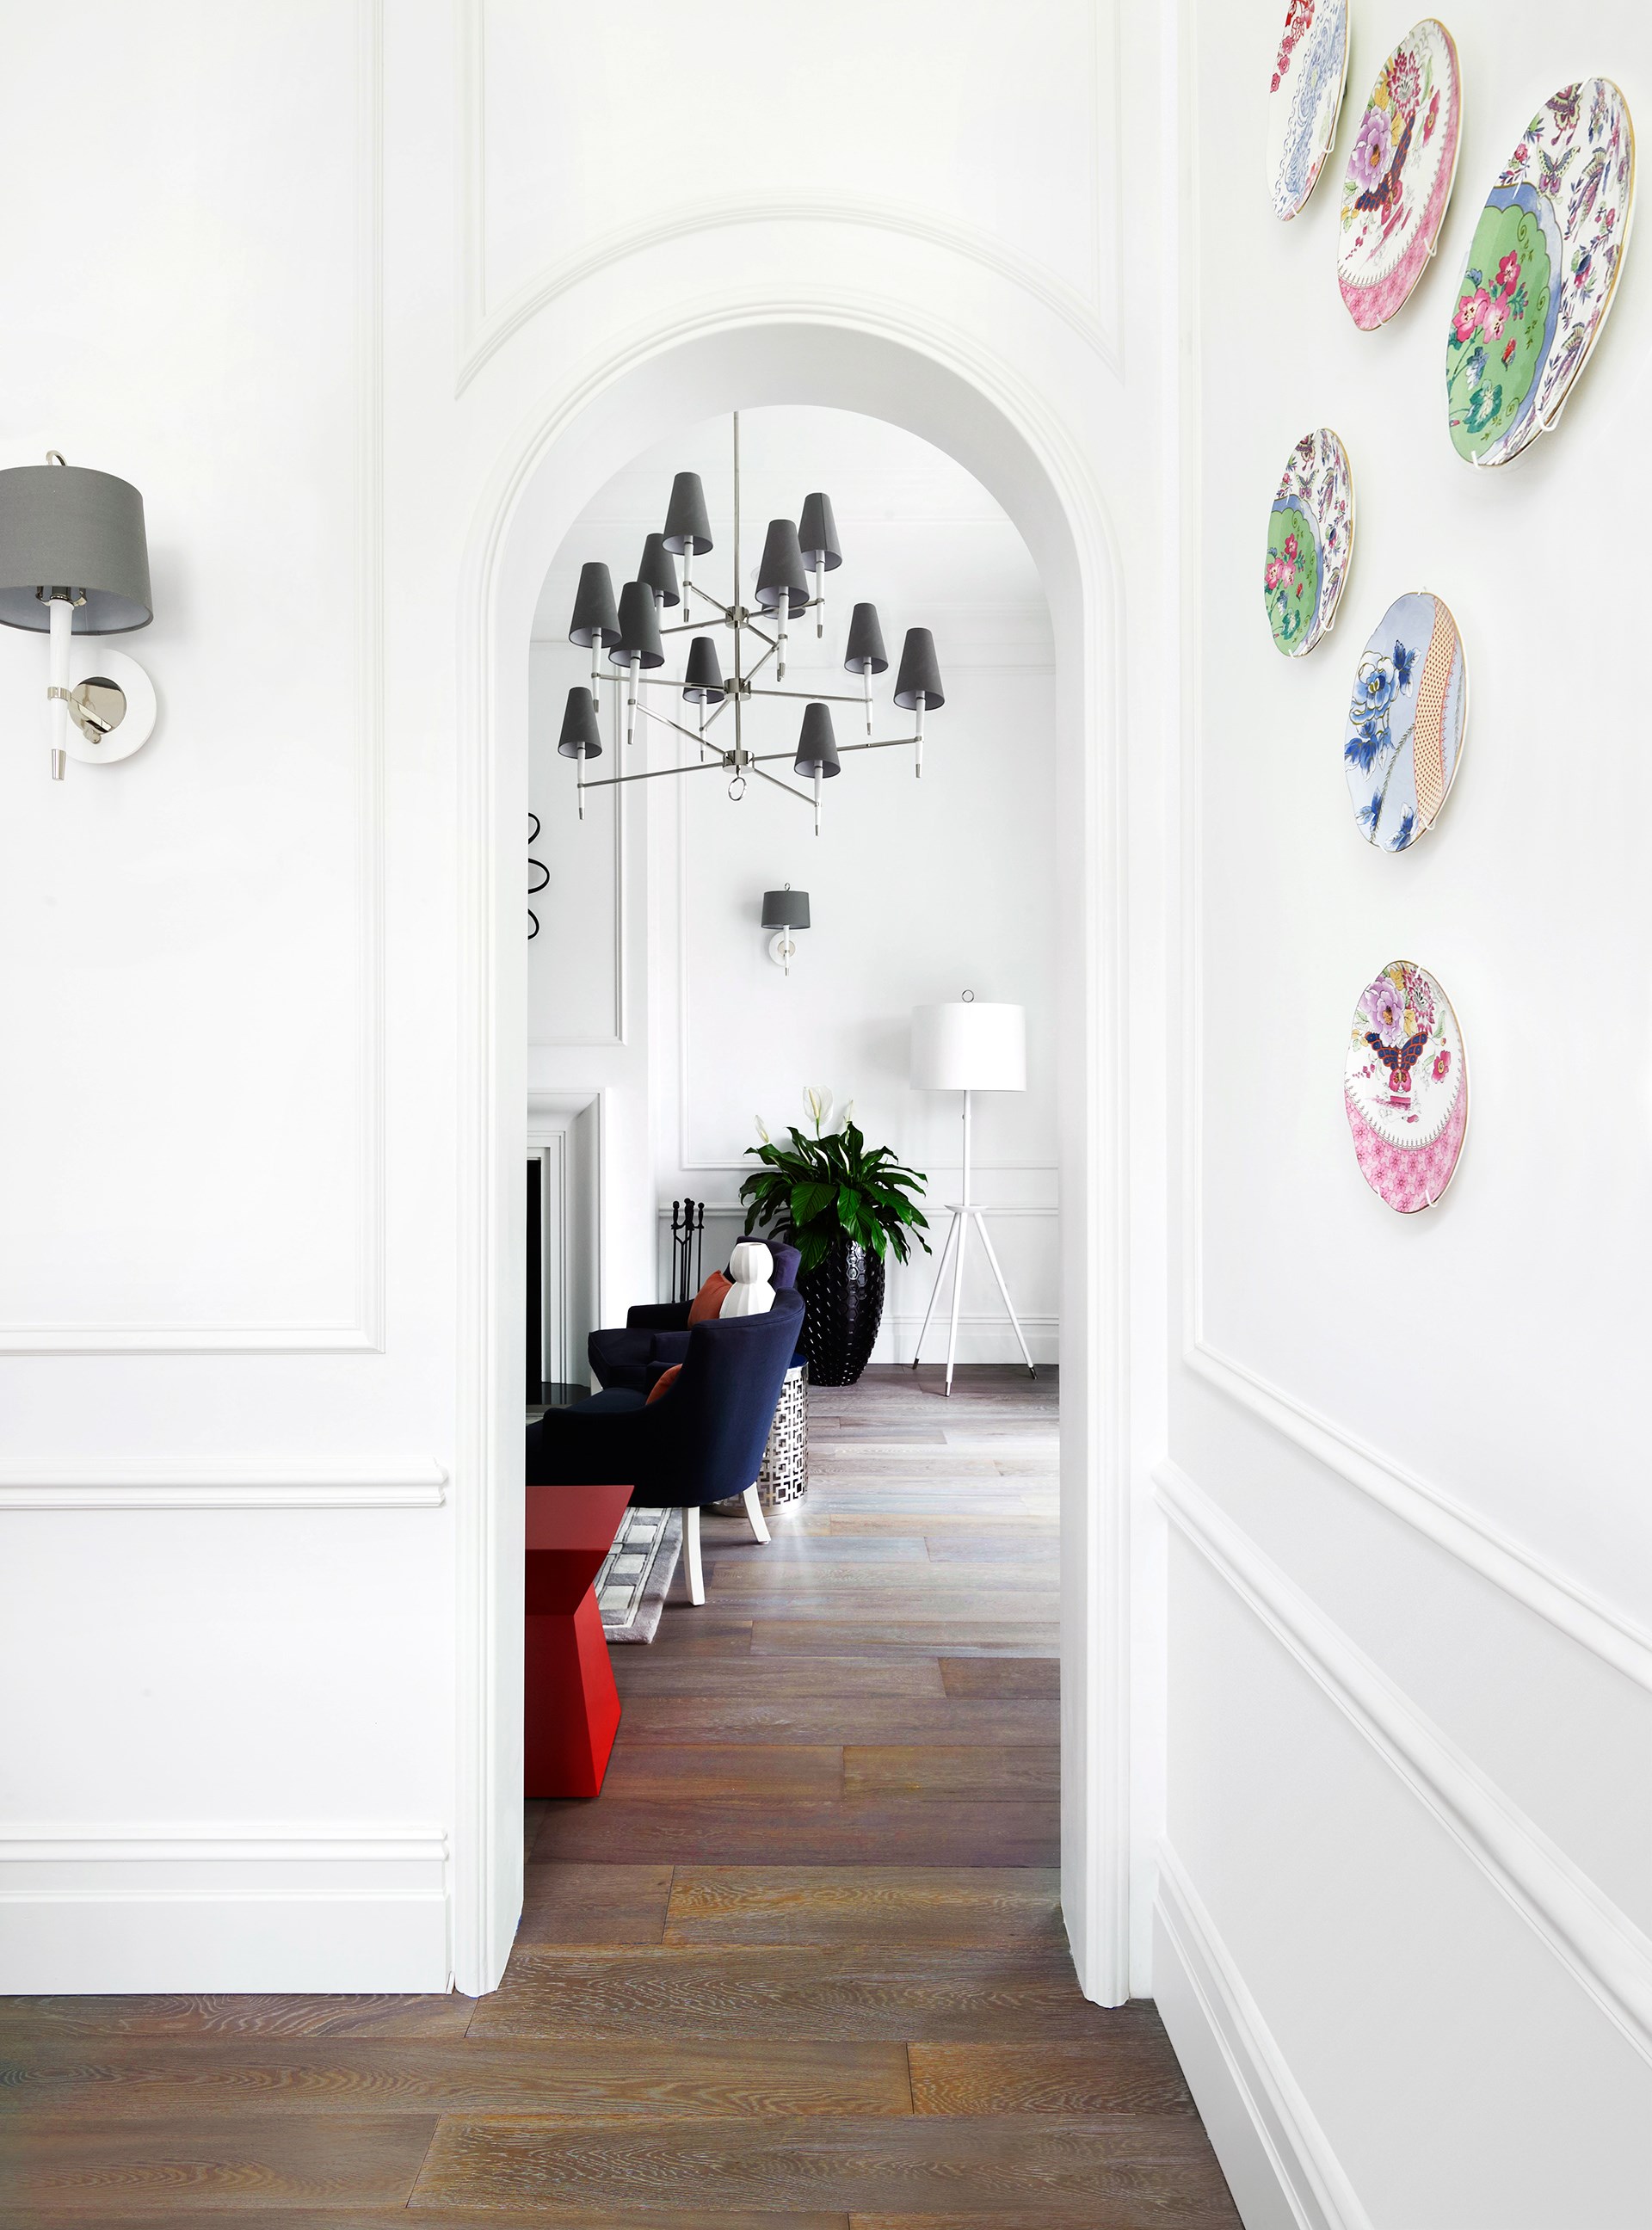 Wall mouldings lend this [luxury family home](http://www.homestolove.com.au/gallery-emma-and-tonis-luxurious-regency-style-home-2311) an early 20th-century French vibe, in keeping with the owner's favourite style. *Photo: Anson Smart*